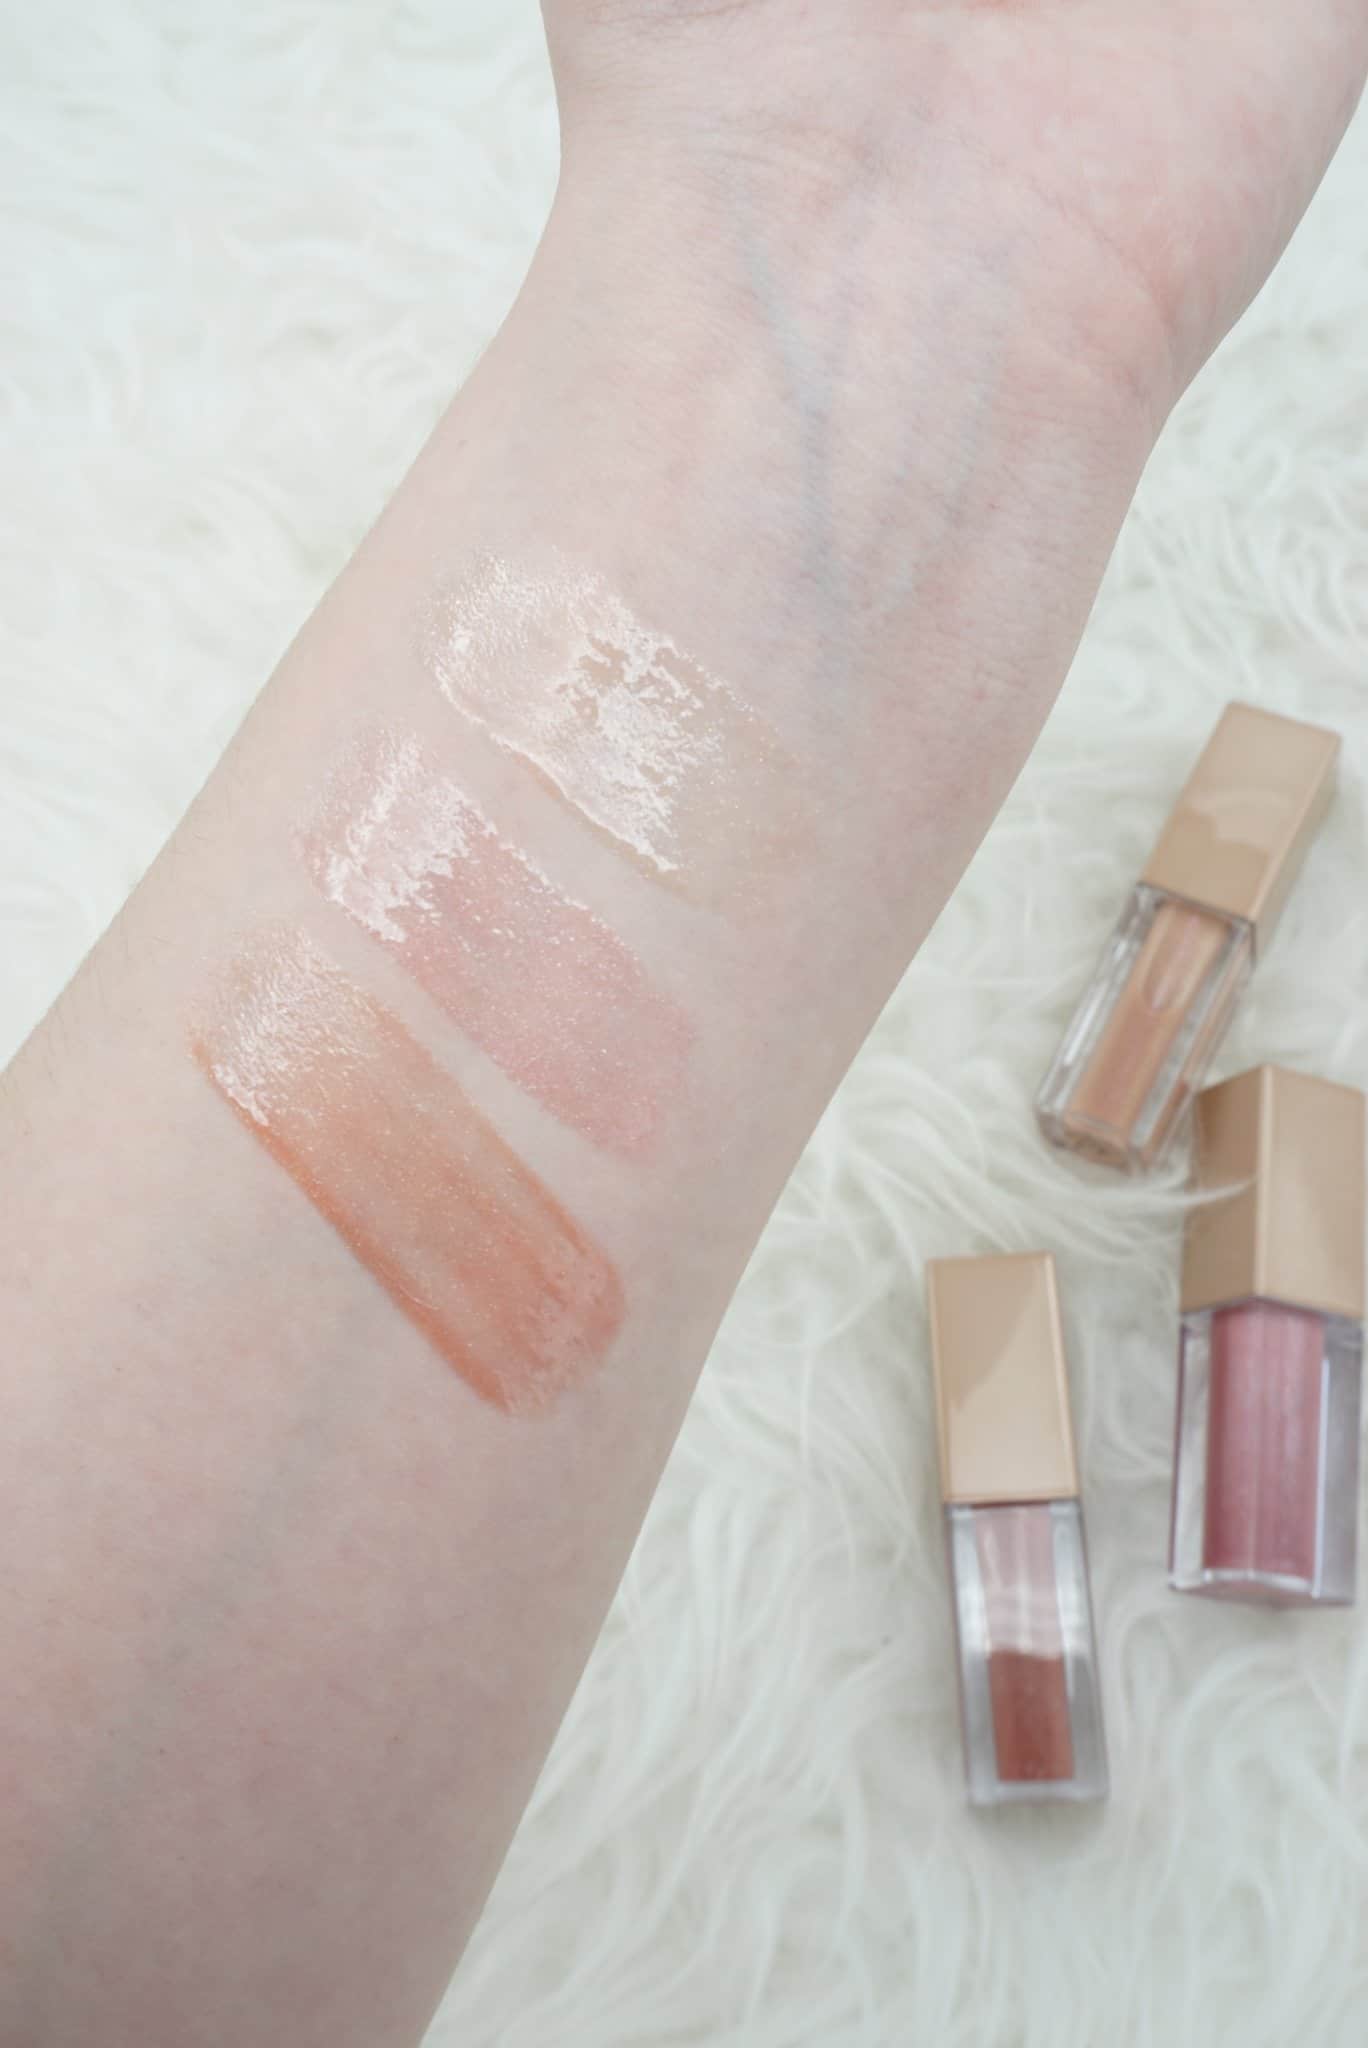 KKW Beauty x Winnie Harlow Collection Review and Swatches